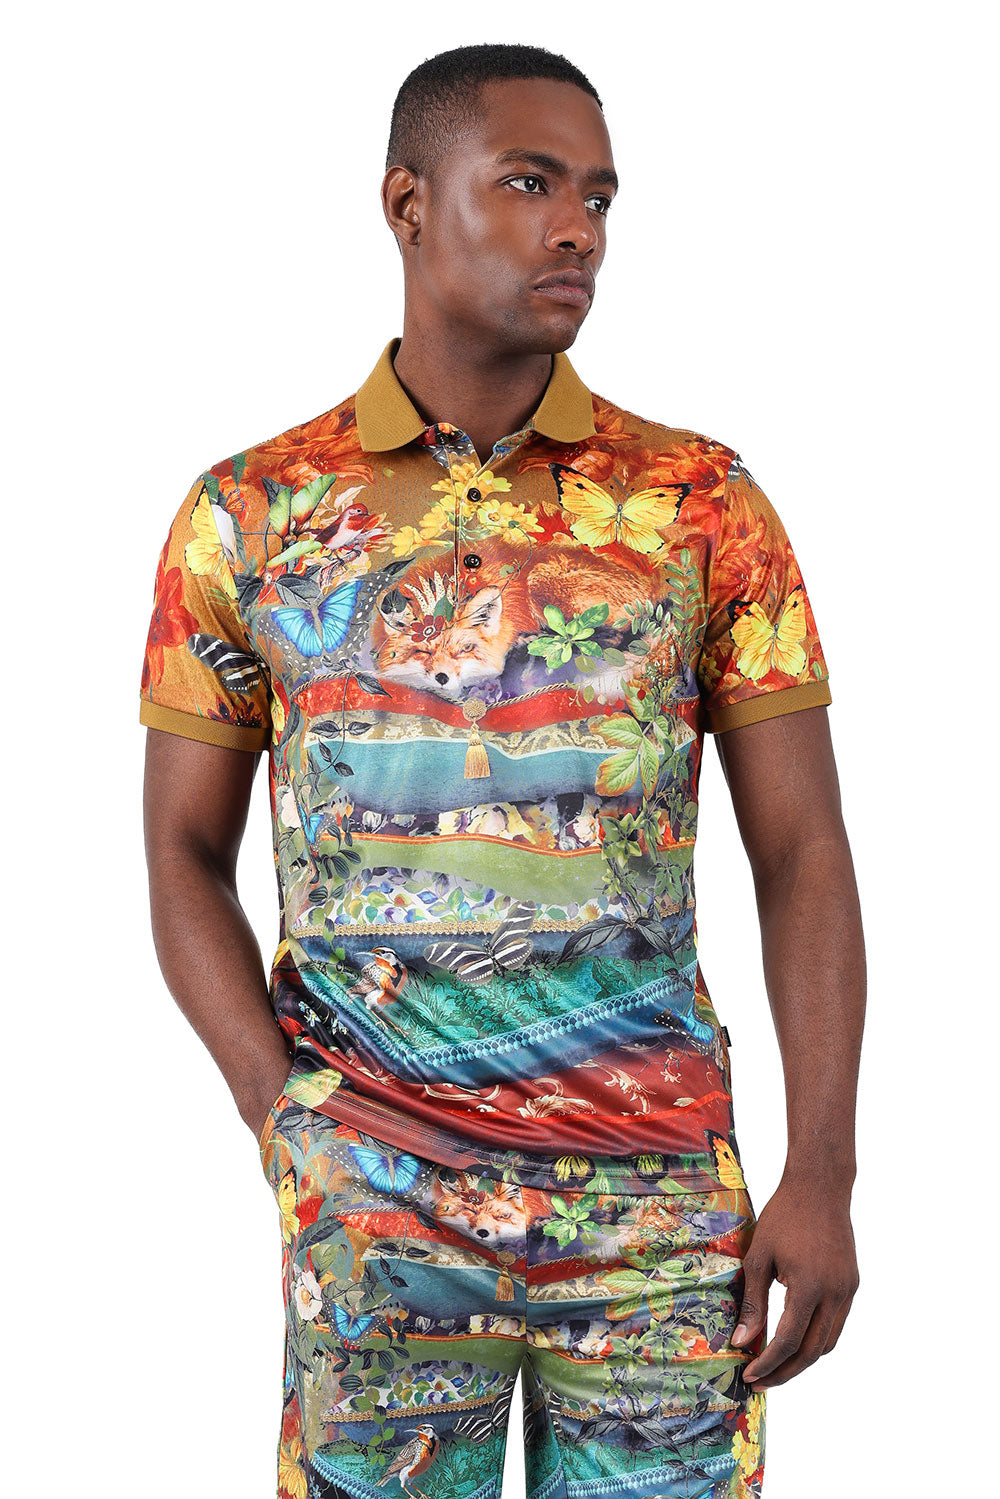 Barabas Men's Floral Pattern Fox Butterfly Fish Polo Shirts 2PSP11 Multicolor